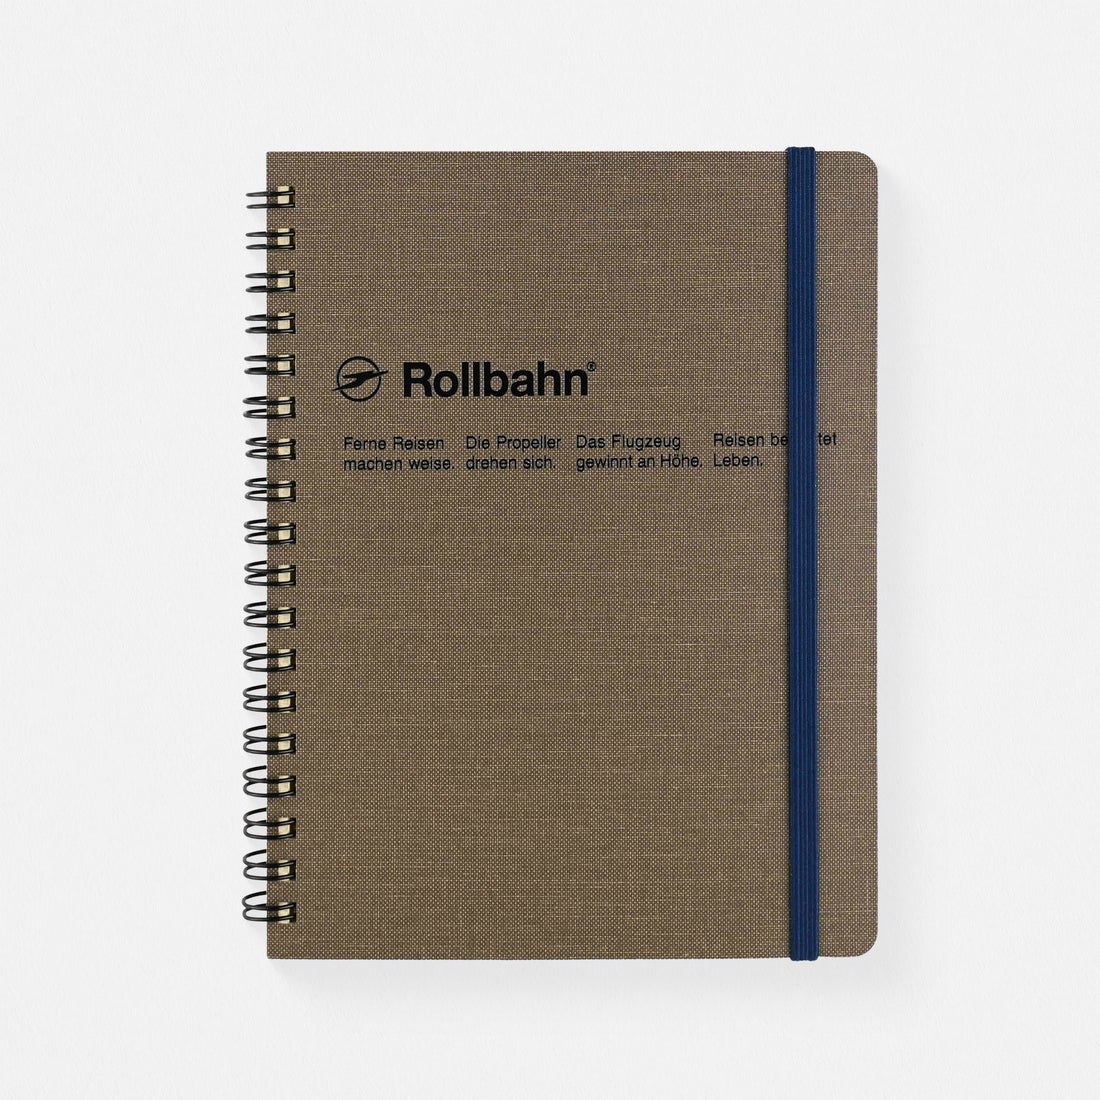 Delfonics Rollbahn Cap-Martin Textured Cover Notebook Large Or A5 | Greige, Green, Dark Blue Or Blue Greige / Large (5.5 x 7")